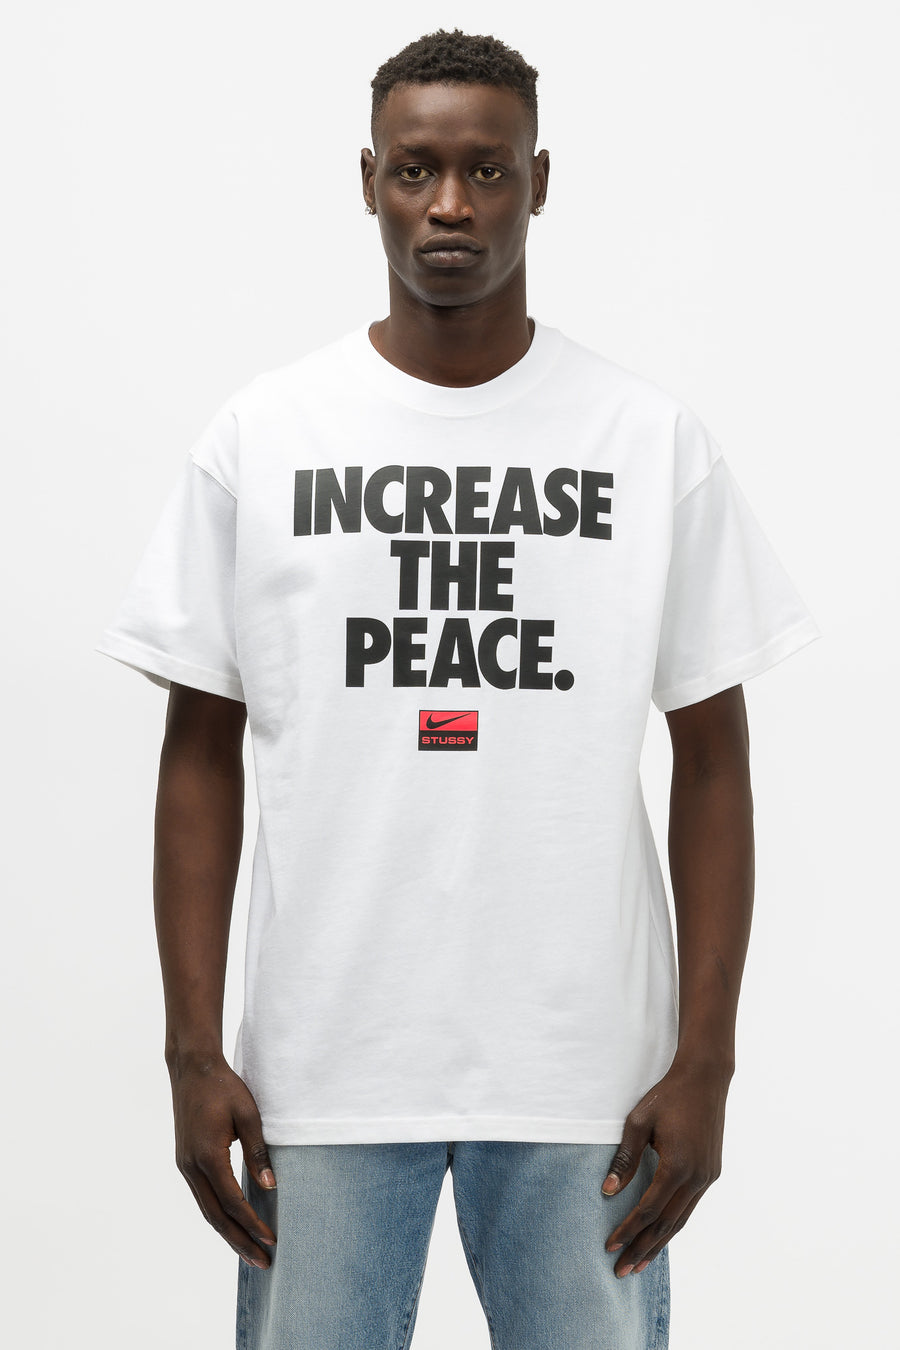 Stüssy Increase the Peace T-Shirt in White